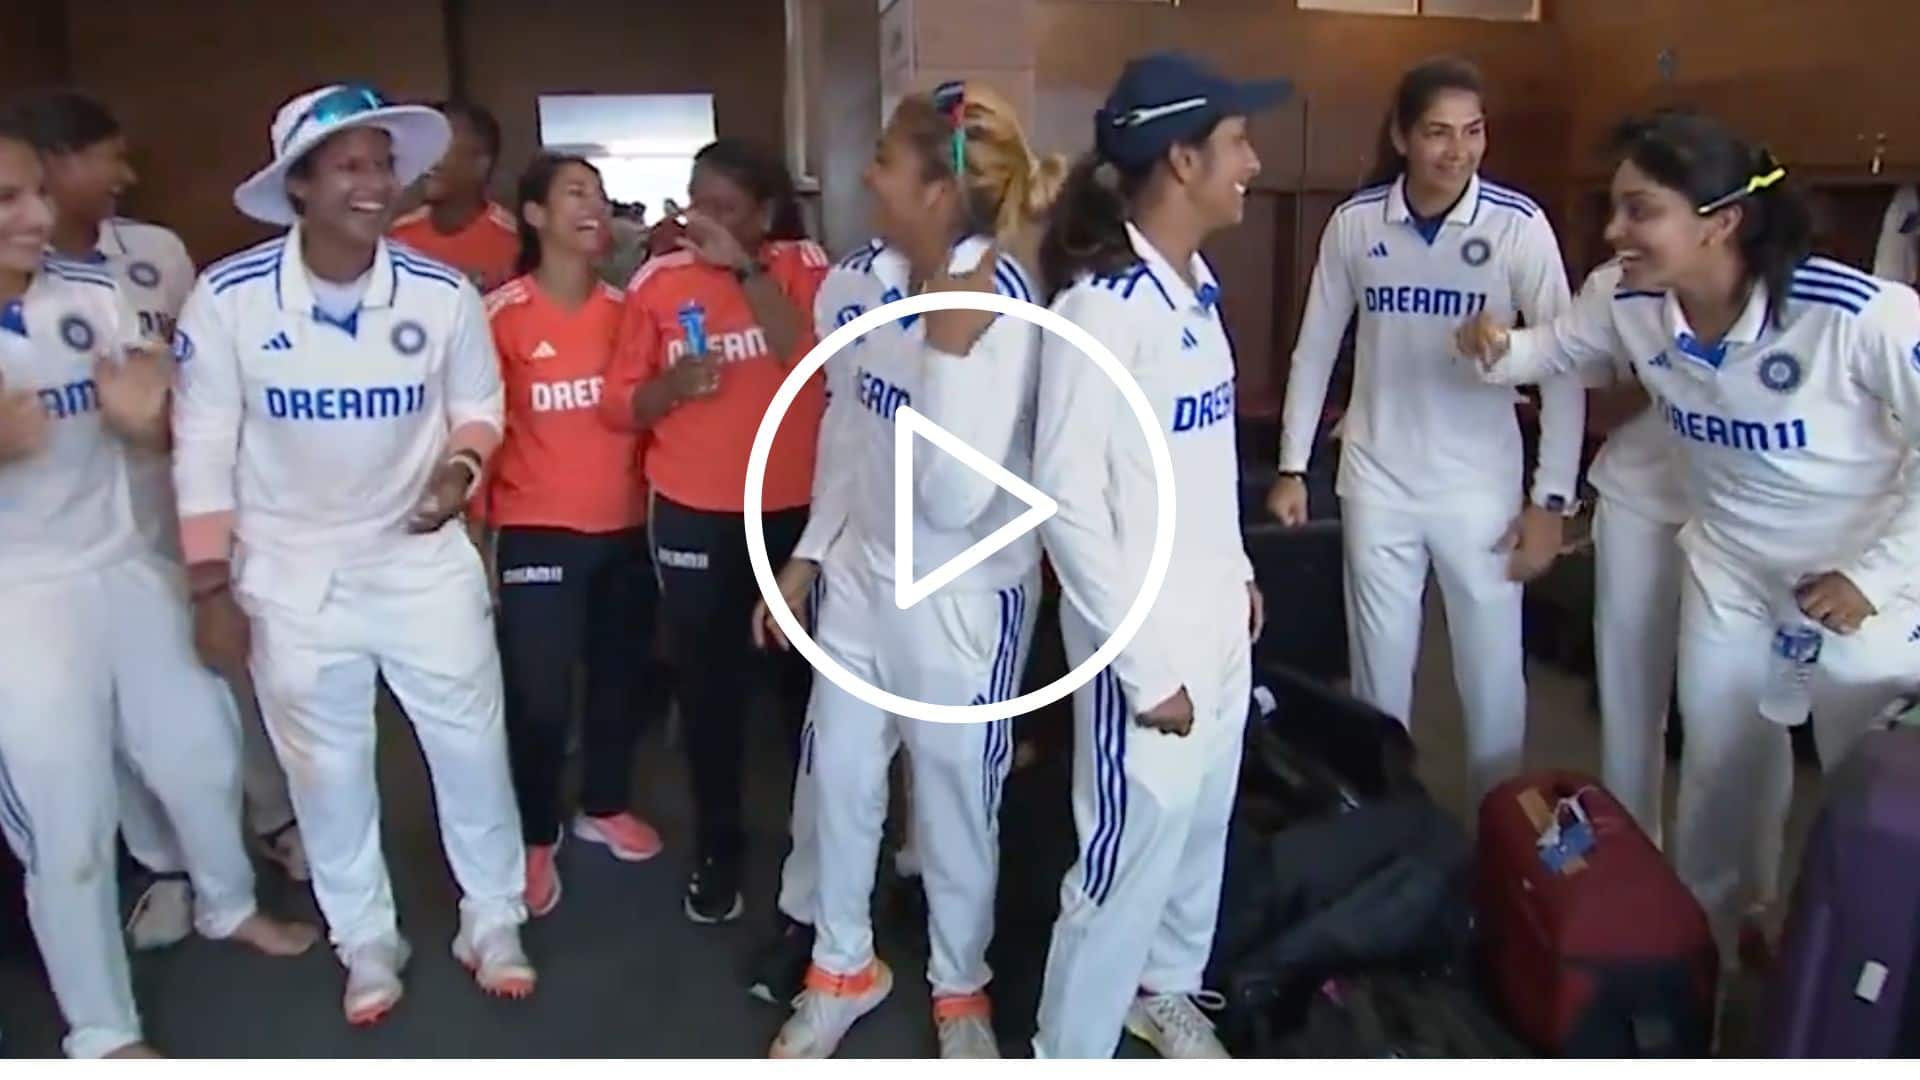 [Watch] '3 Lakh Ki Party' - Indian Team Celebrate After Historic Test Win Over England